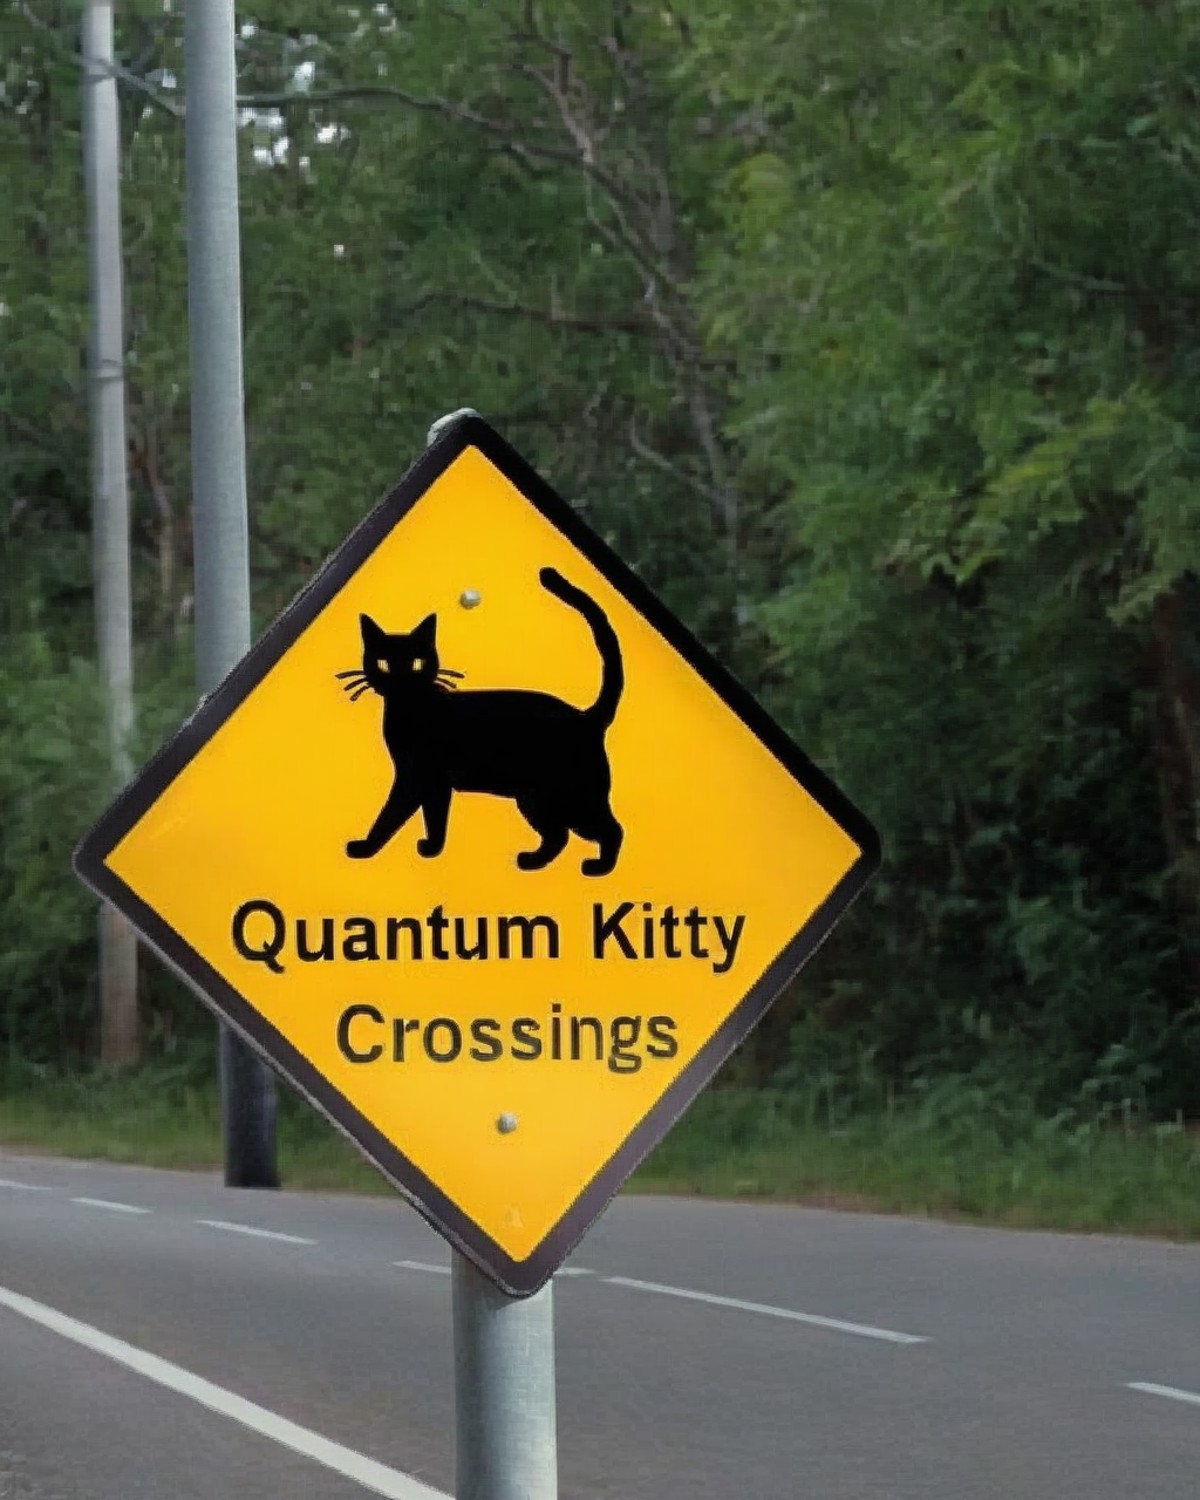 a photo of a road sign , Caution: Quantum Kitty Crossings:1.4, a sign indicating the presence of "Quantum Kitty Crossings,...